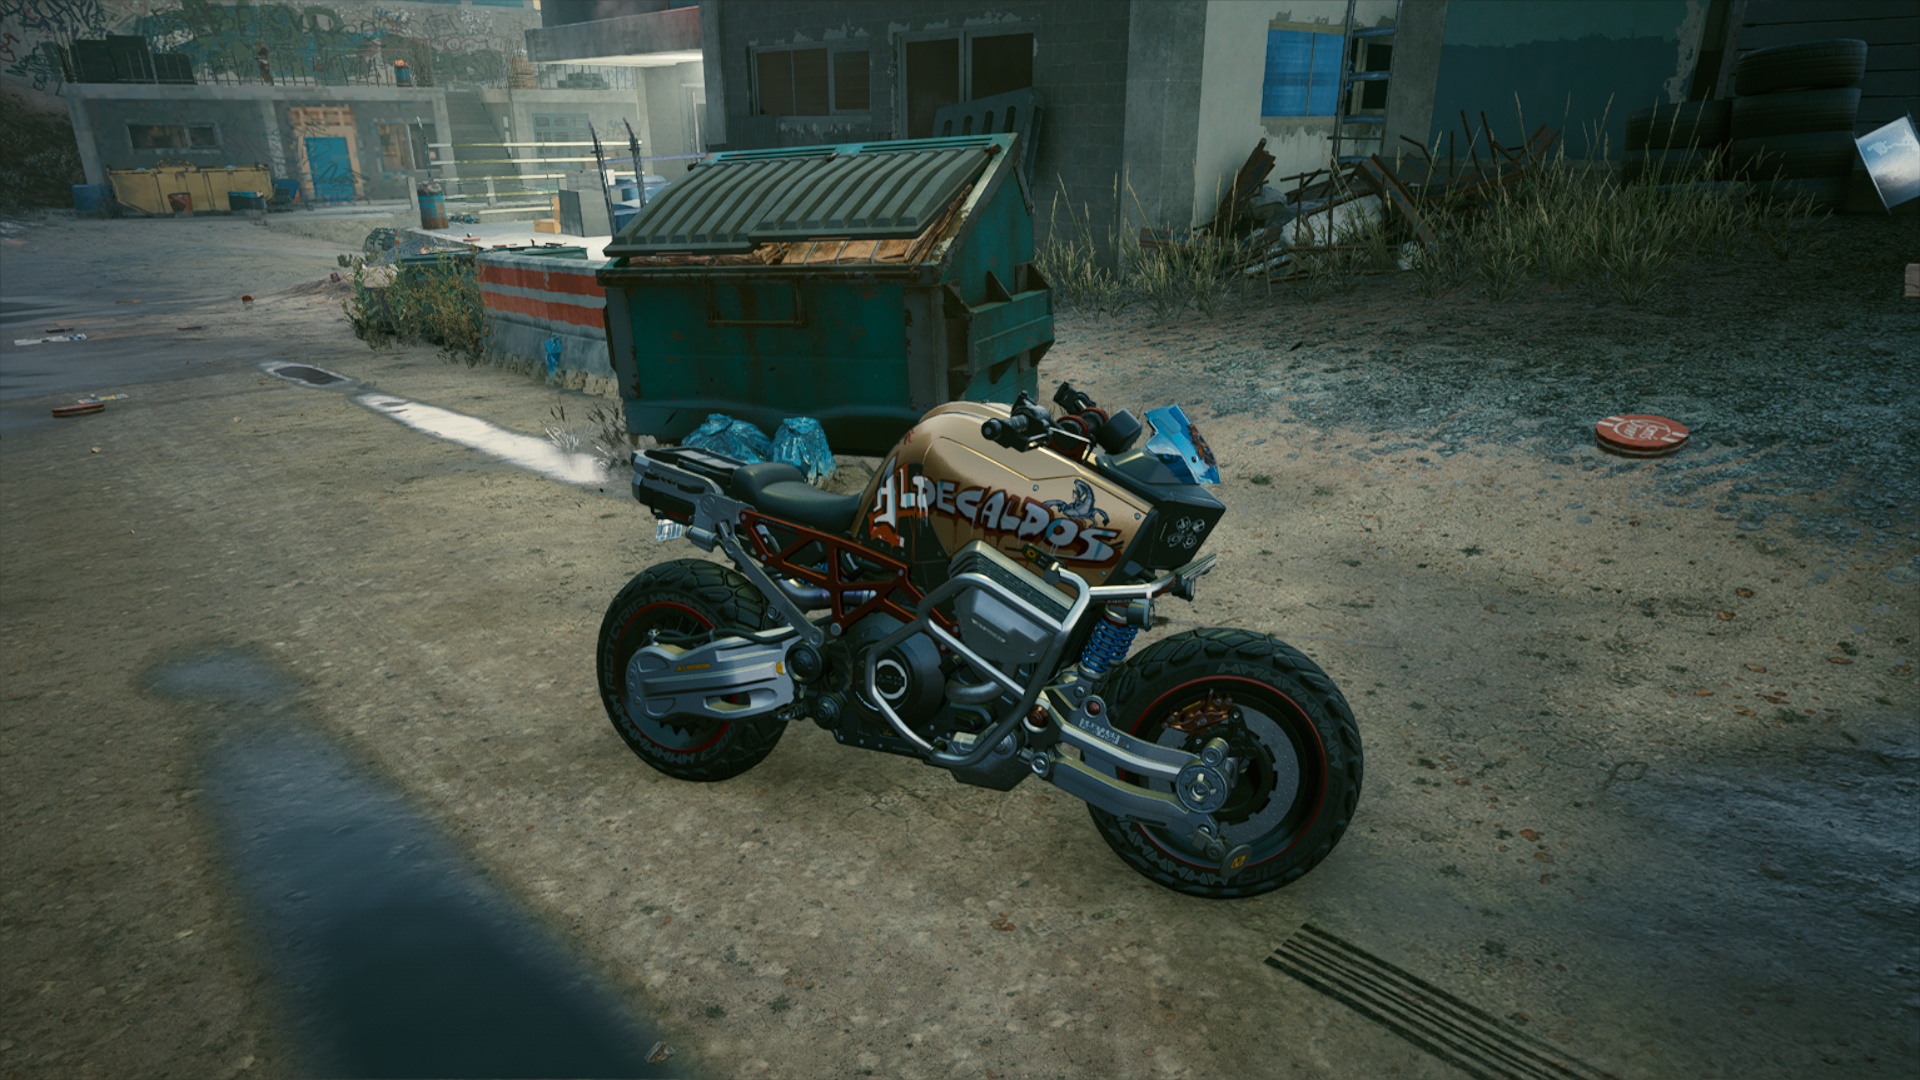 This motorbike is given as a gift in the course of the main story.